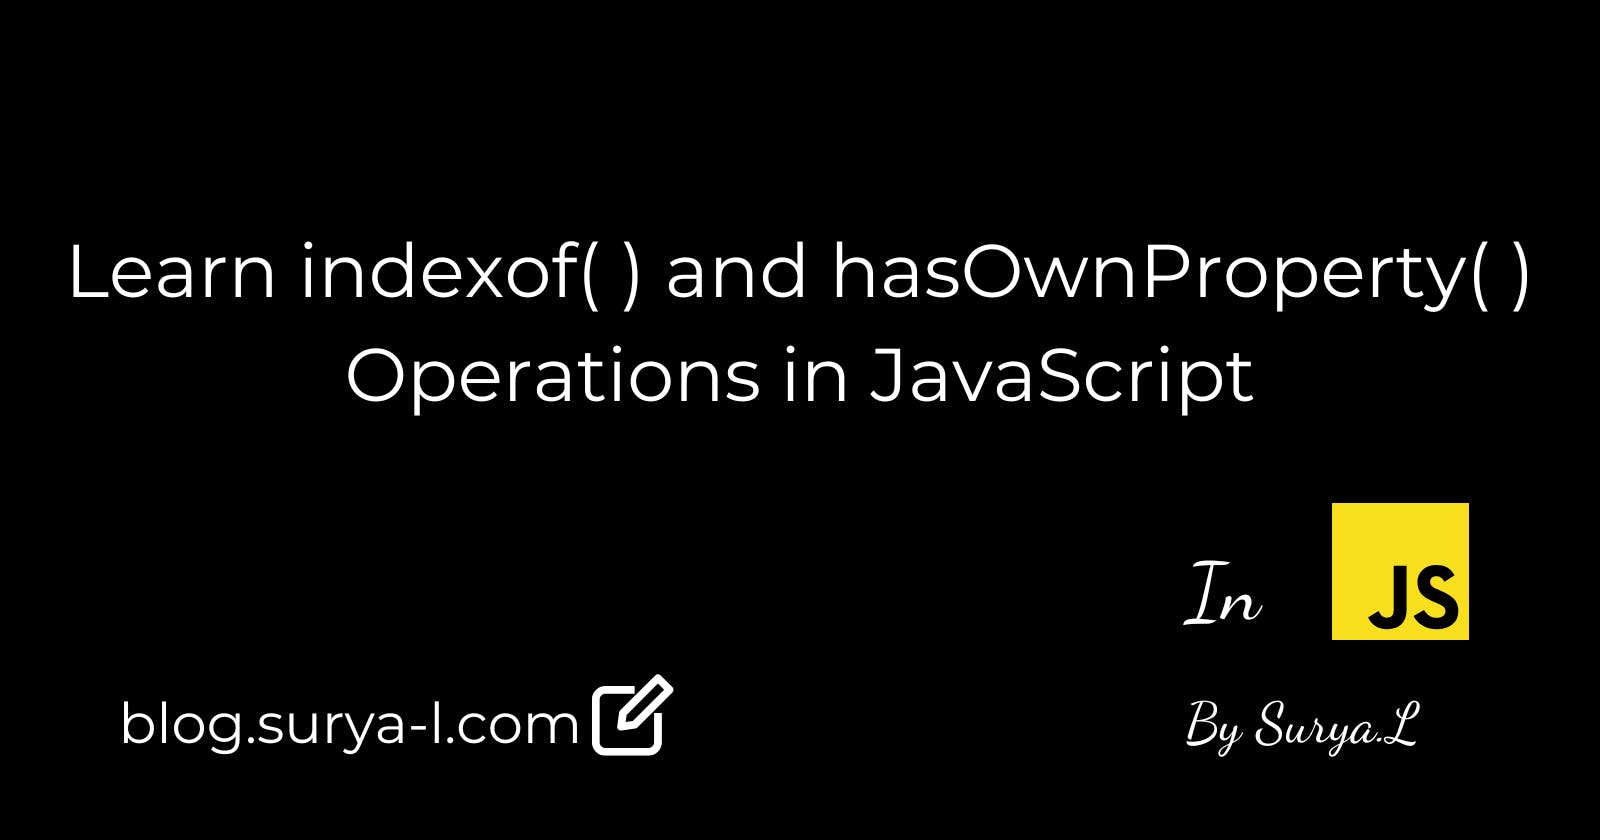 Learn indexof( ) and hasOwnProperty( ) Operations in JavaScript